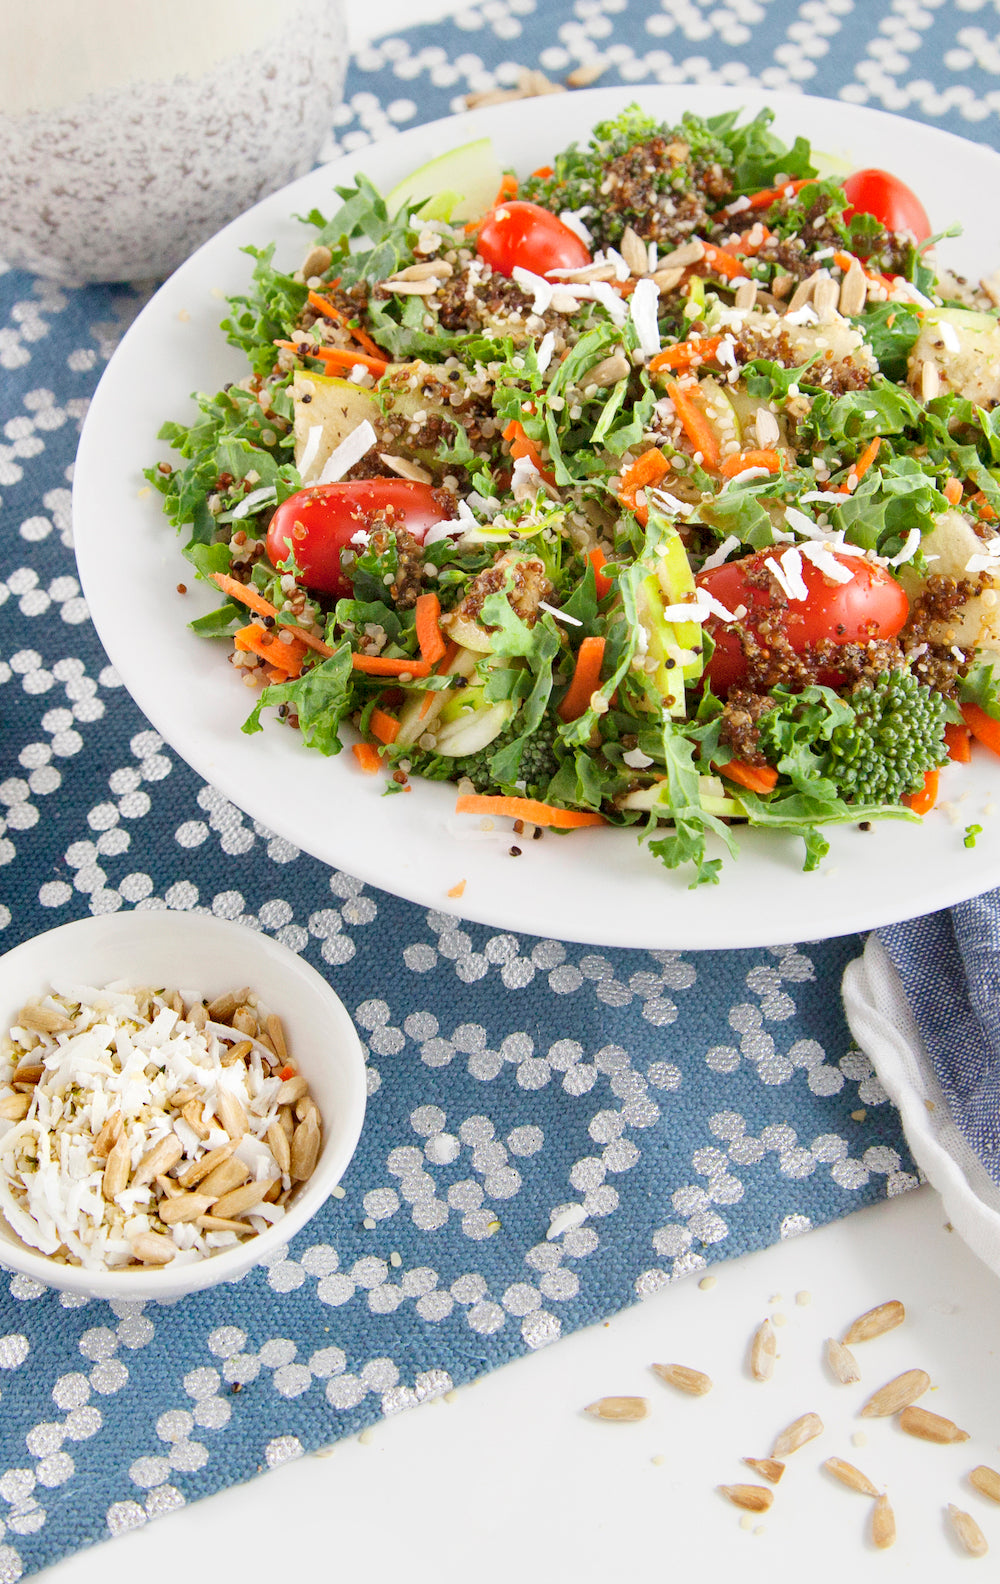 Coconut Kale and Quinoa Antioxidant Salad with Hemp Seeds and Apple Balsamic